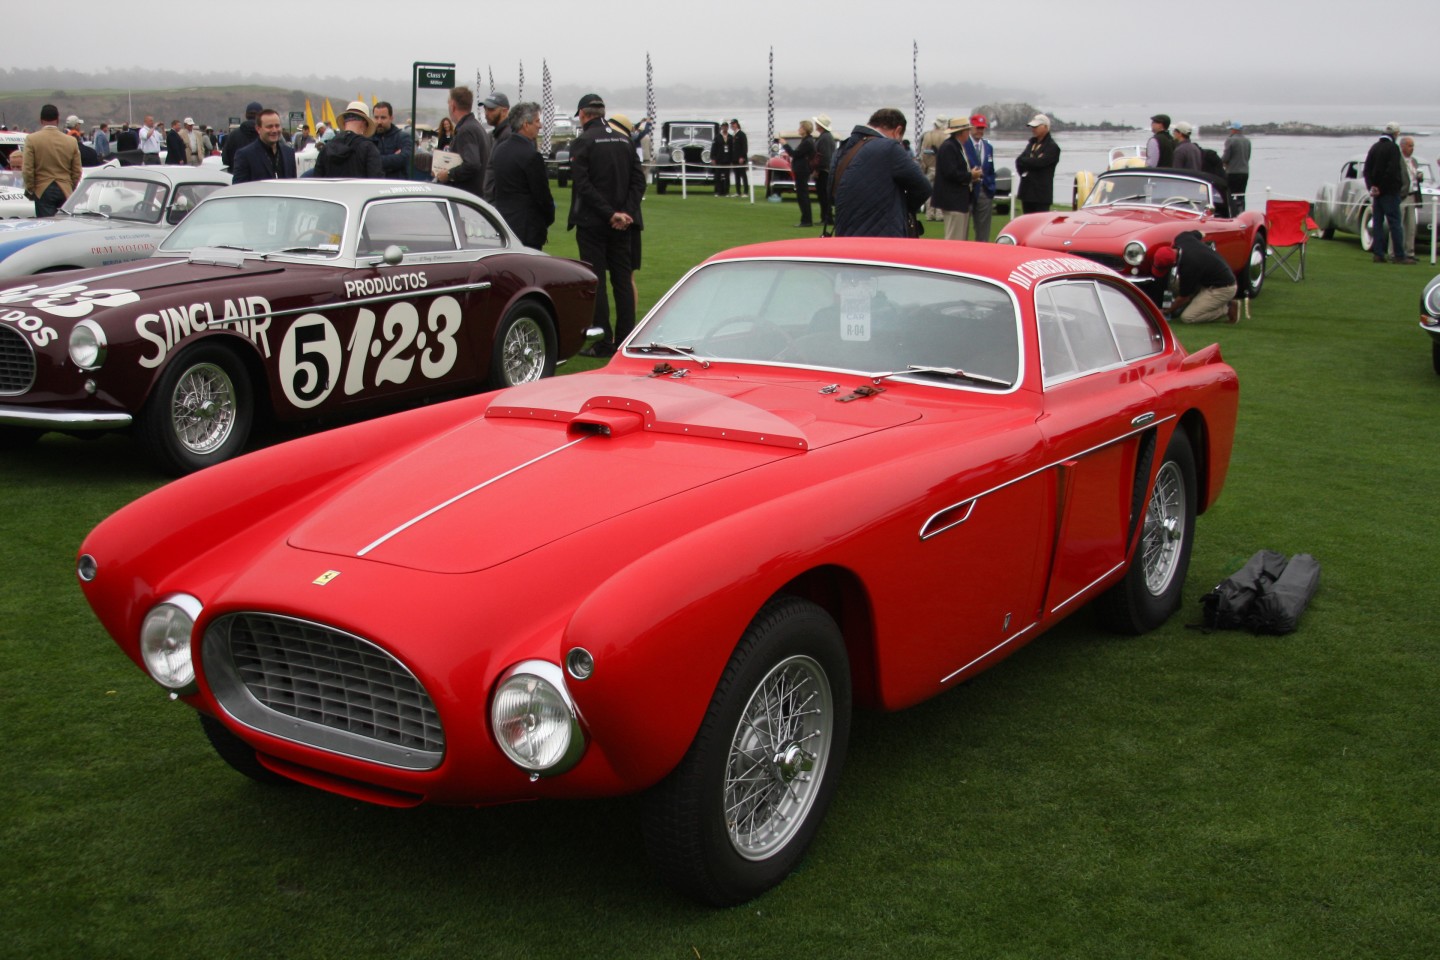 The winner of the La Carrera Panamericana Class in the 2021 Pebble Beach Concours was this 1952 Ferrari 340 Mexico Vignale Berlinetta owned by Les Wexner of New Albany, Ohio.